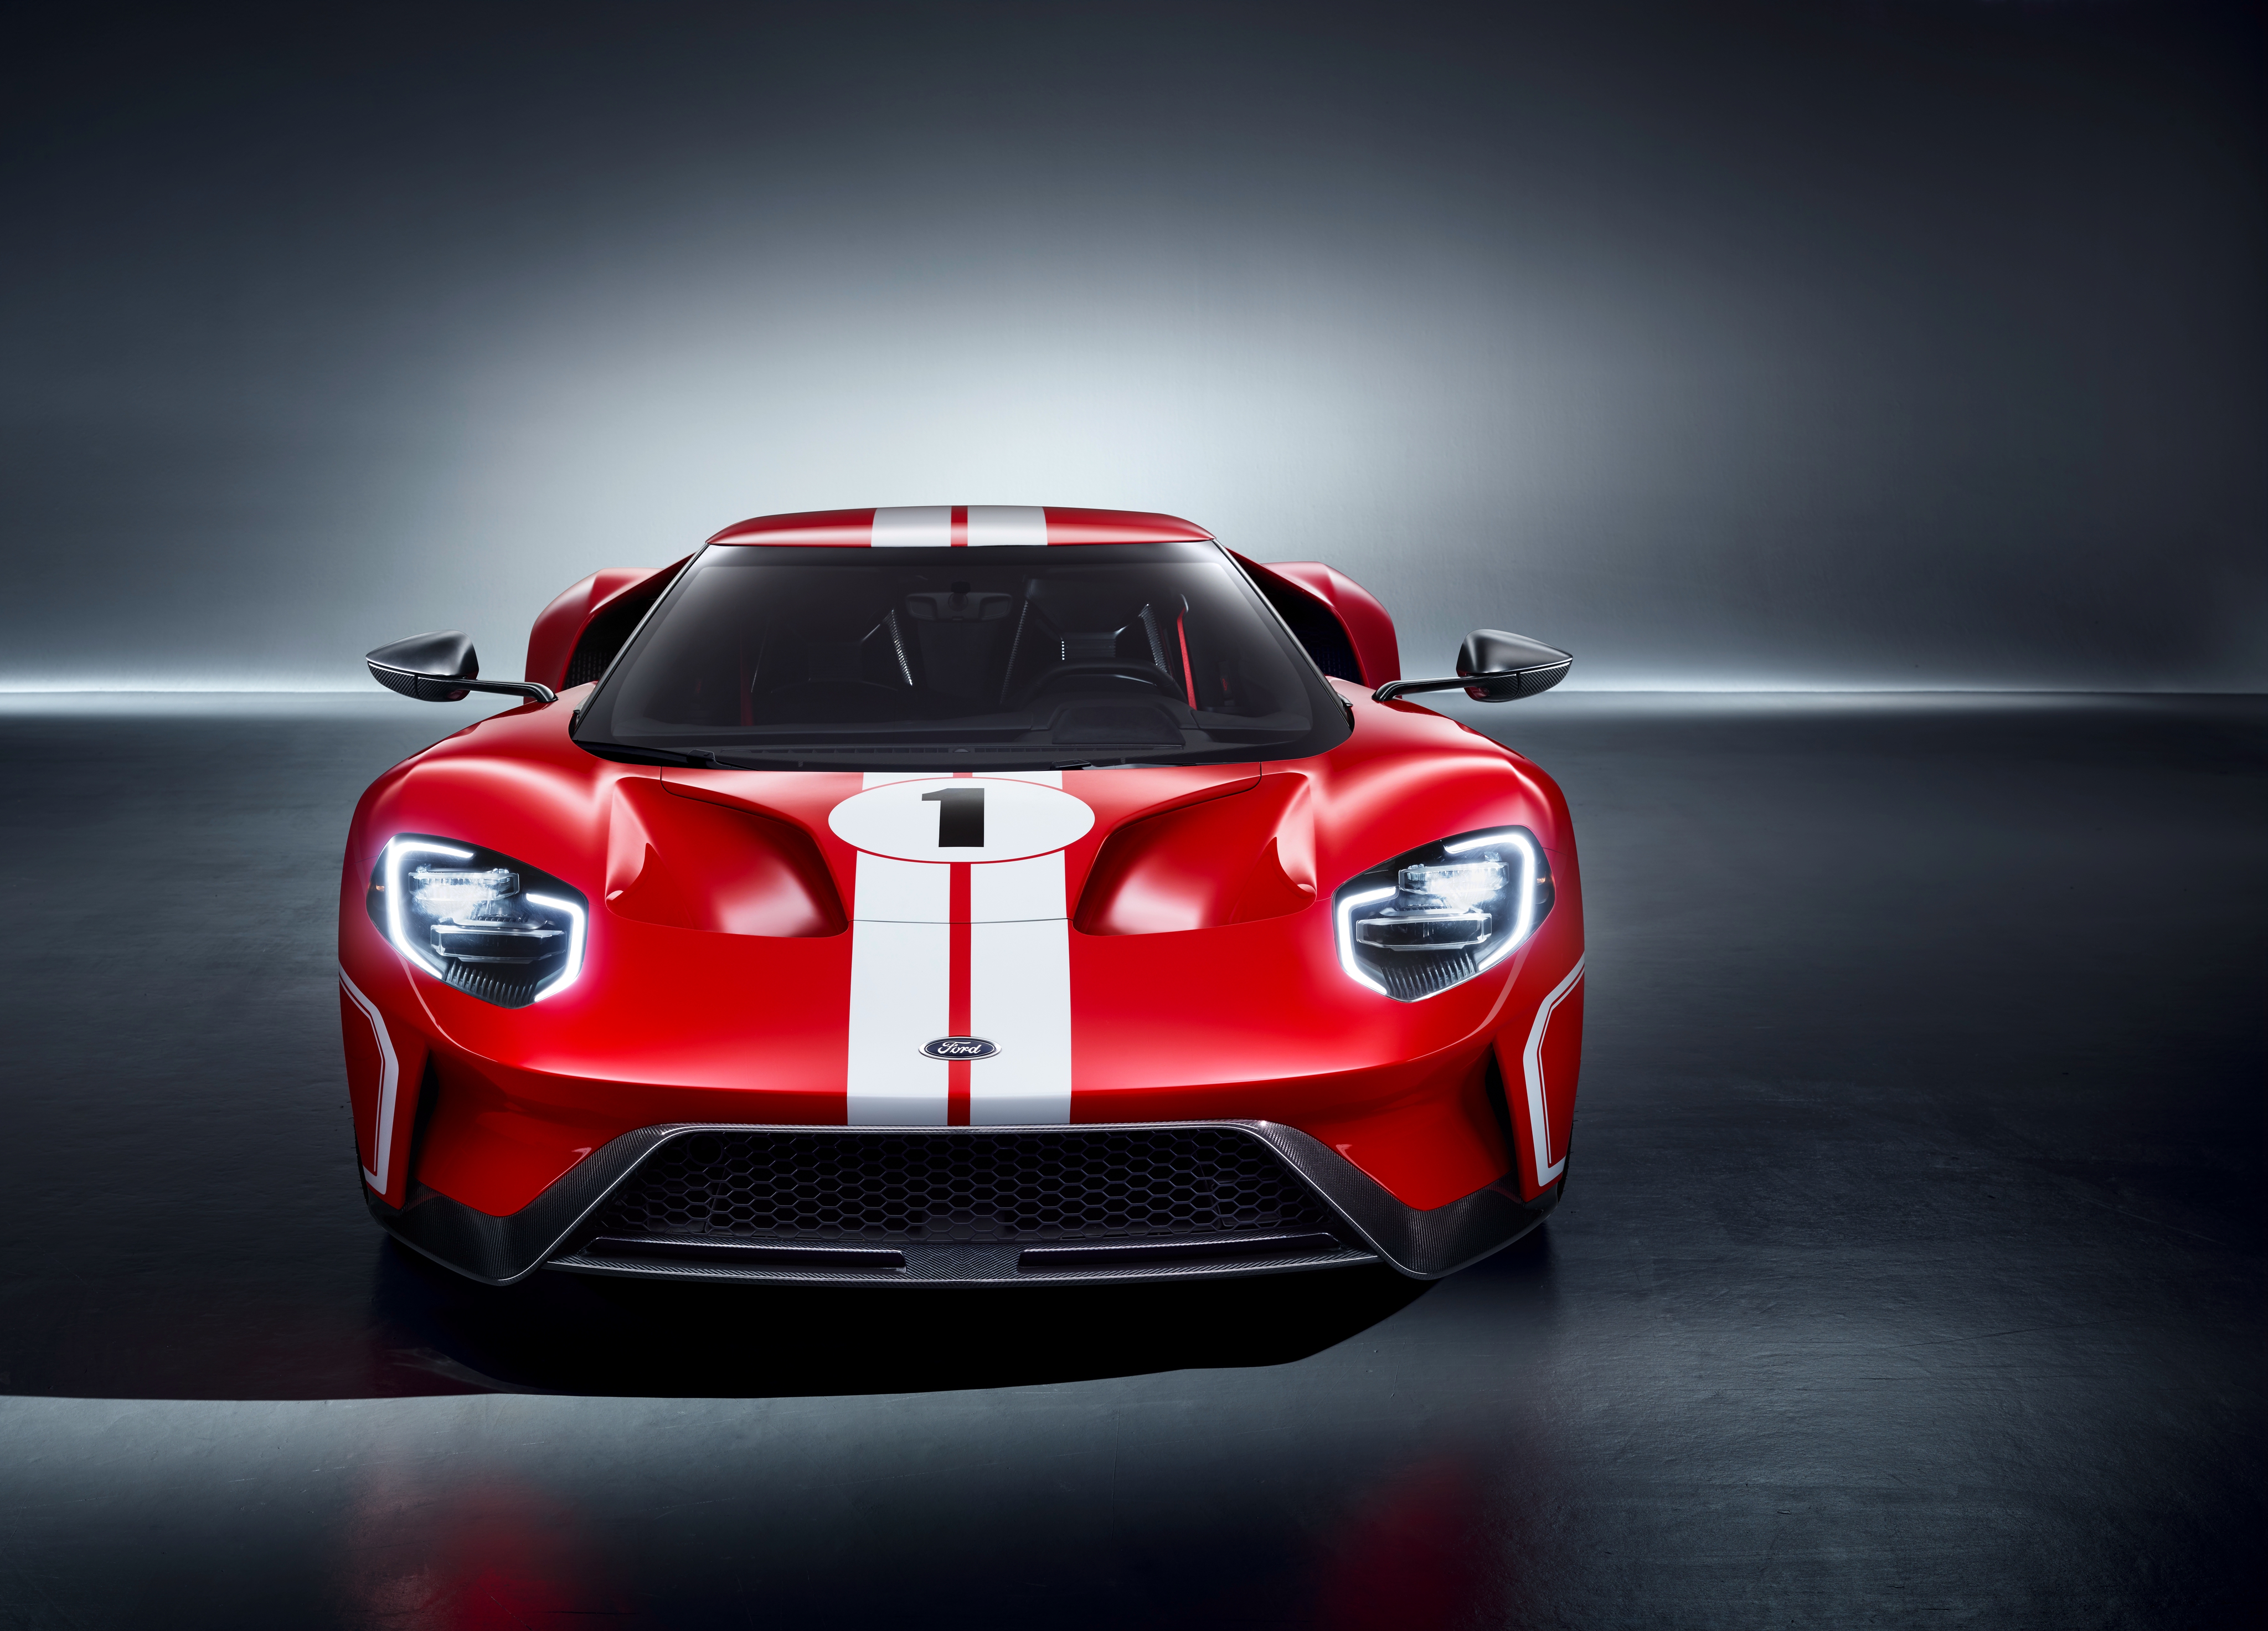 2018 Ford Gt 67 Heritage Edition - HD Wallpaper 